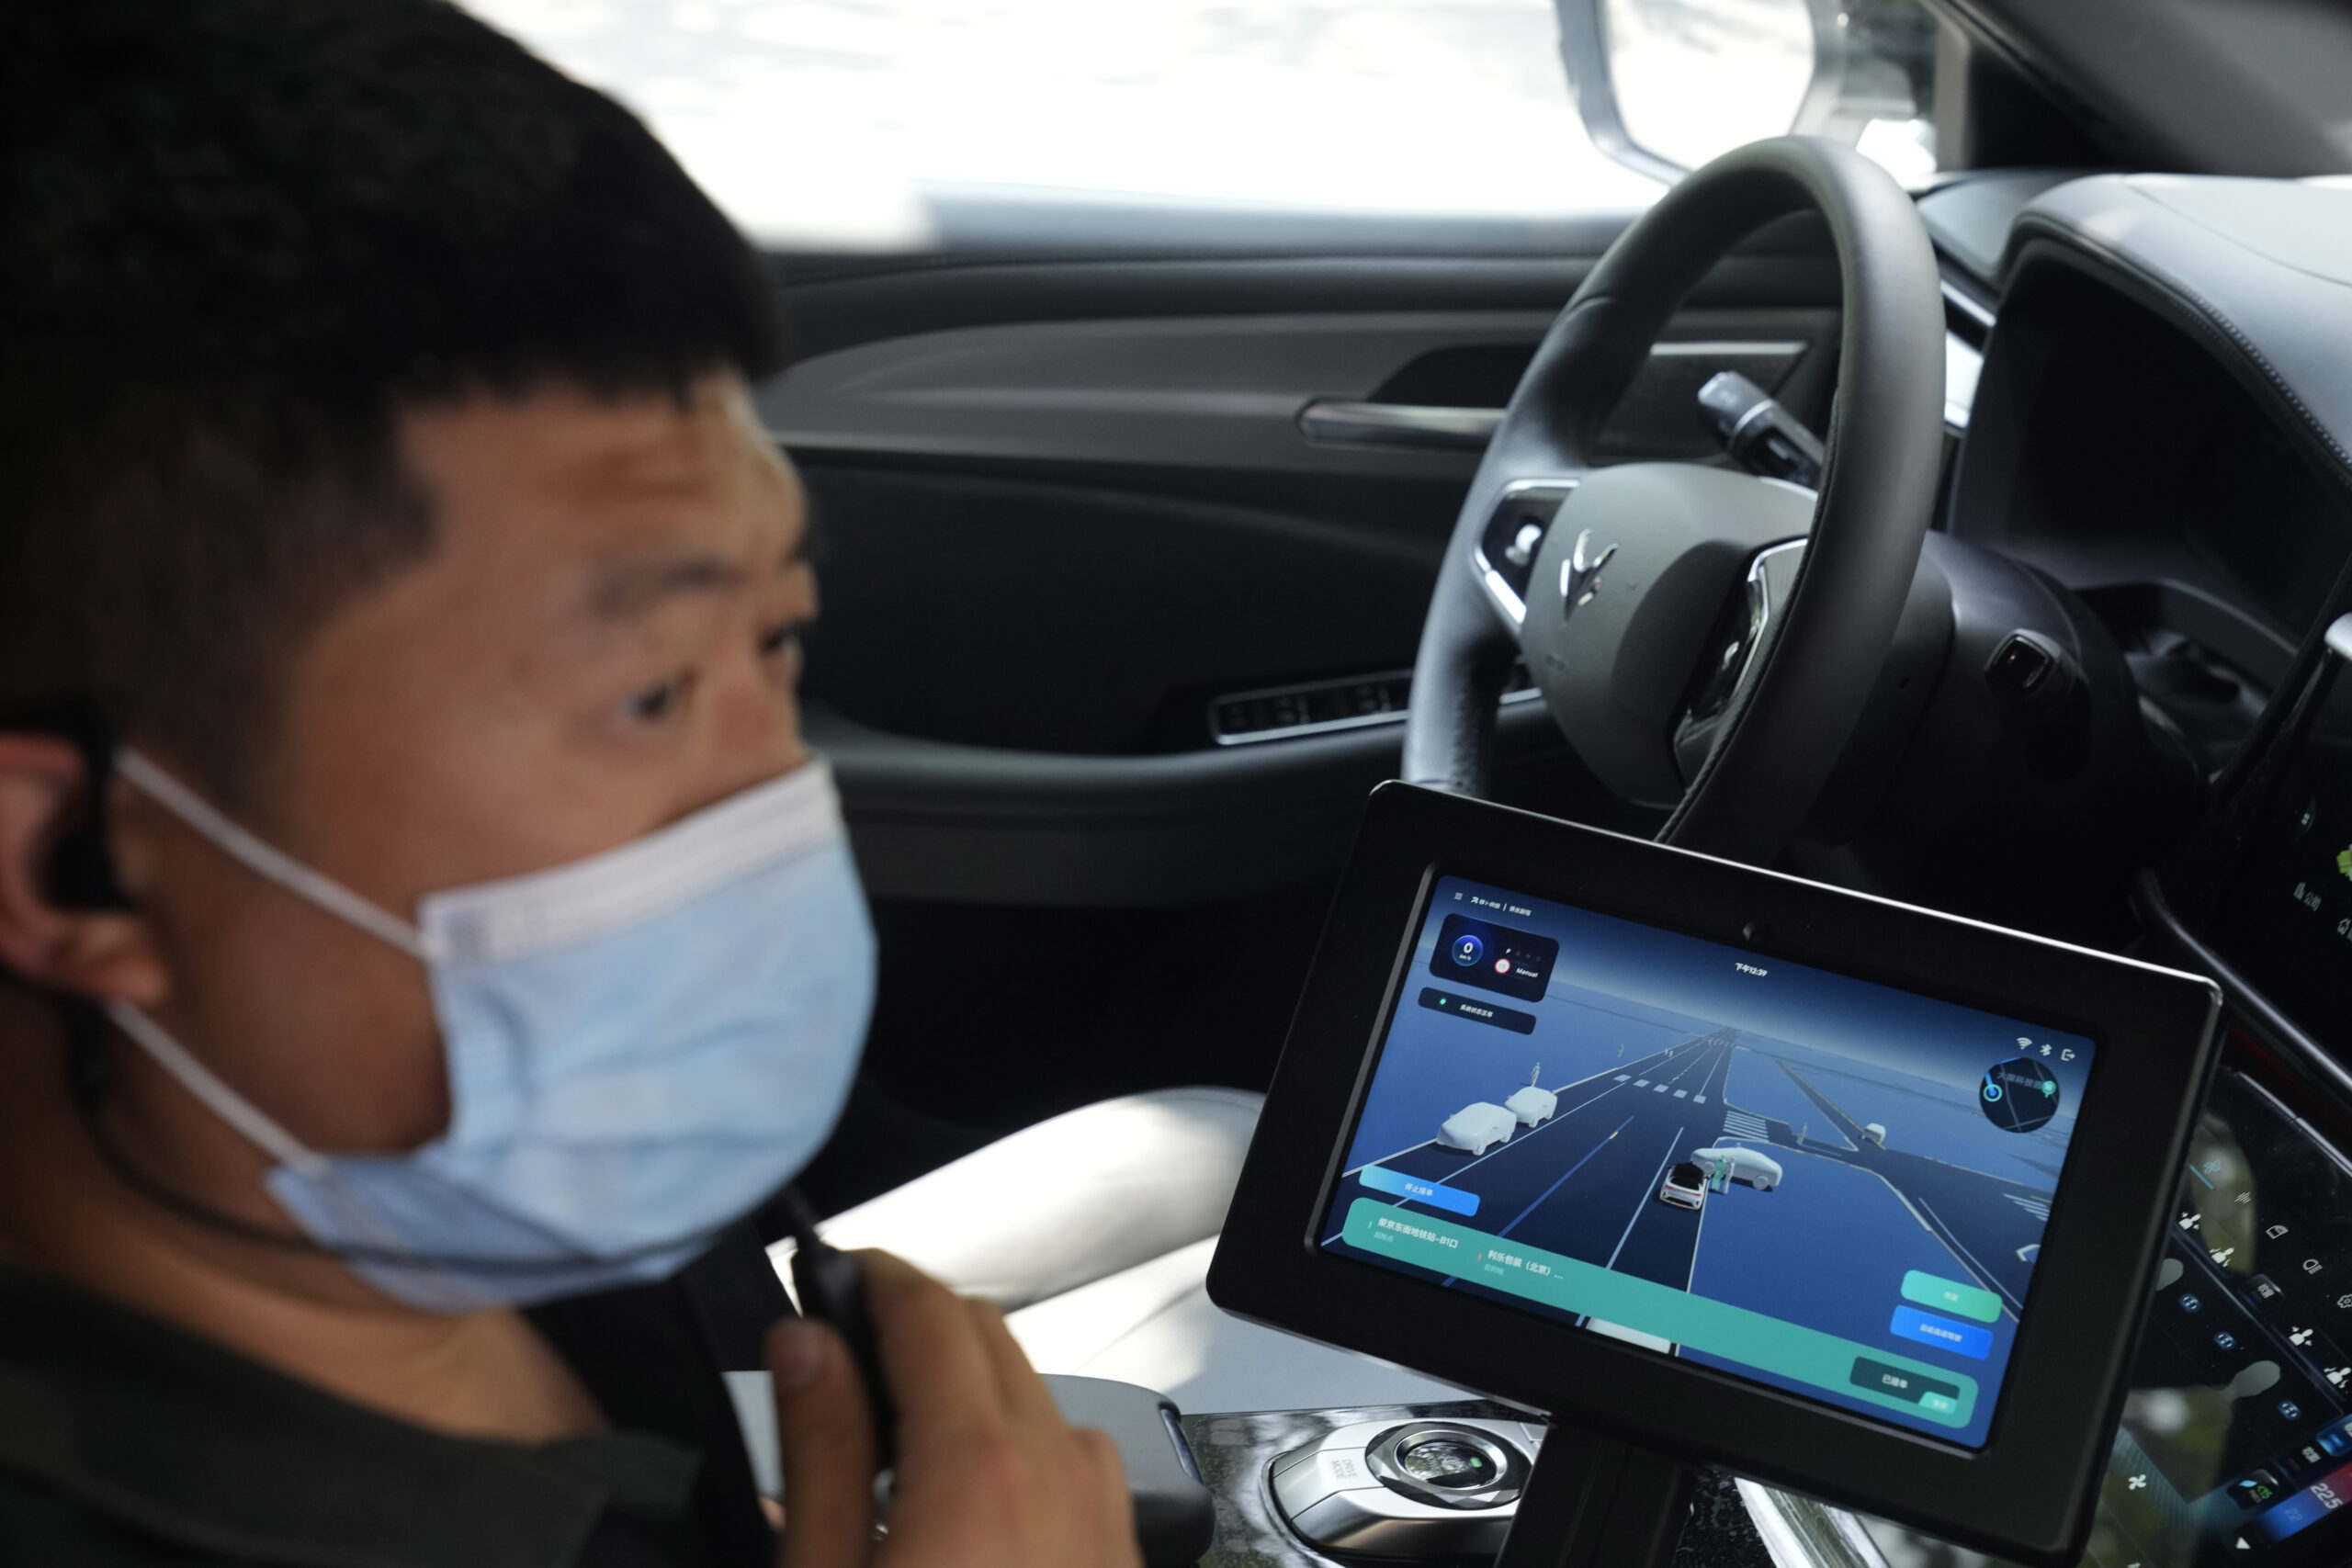 A man with a covid mask on sits and works on a screen in a car. The screen has a map on it.